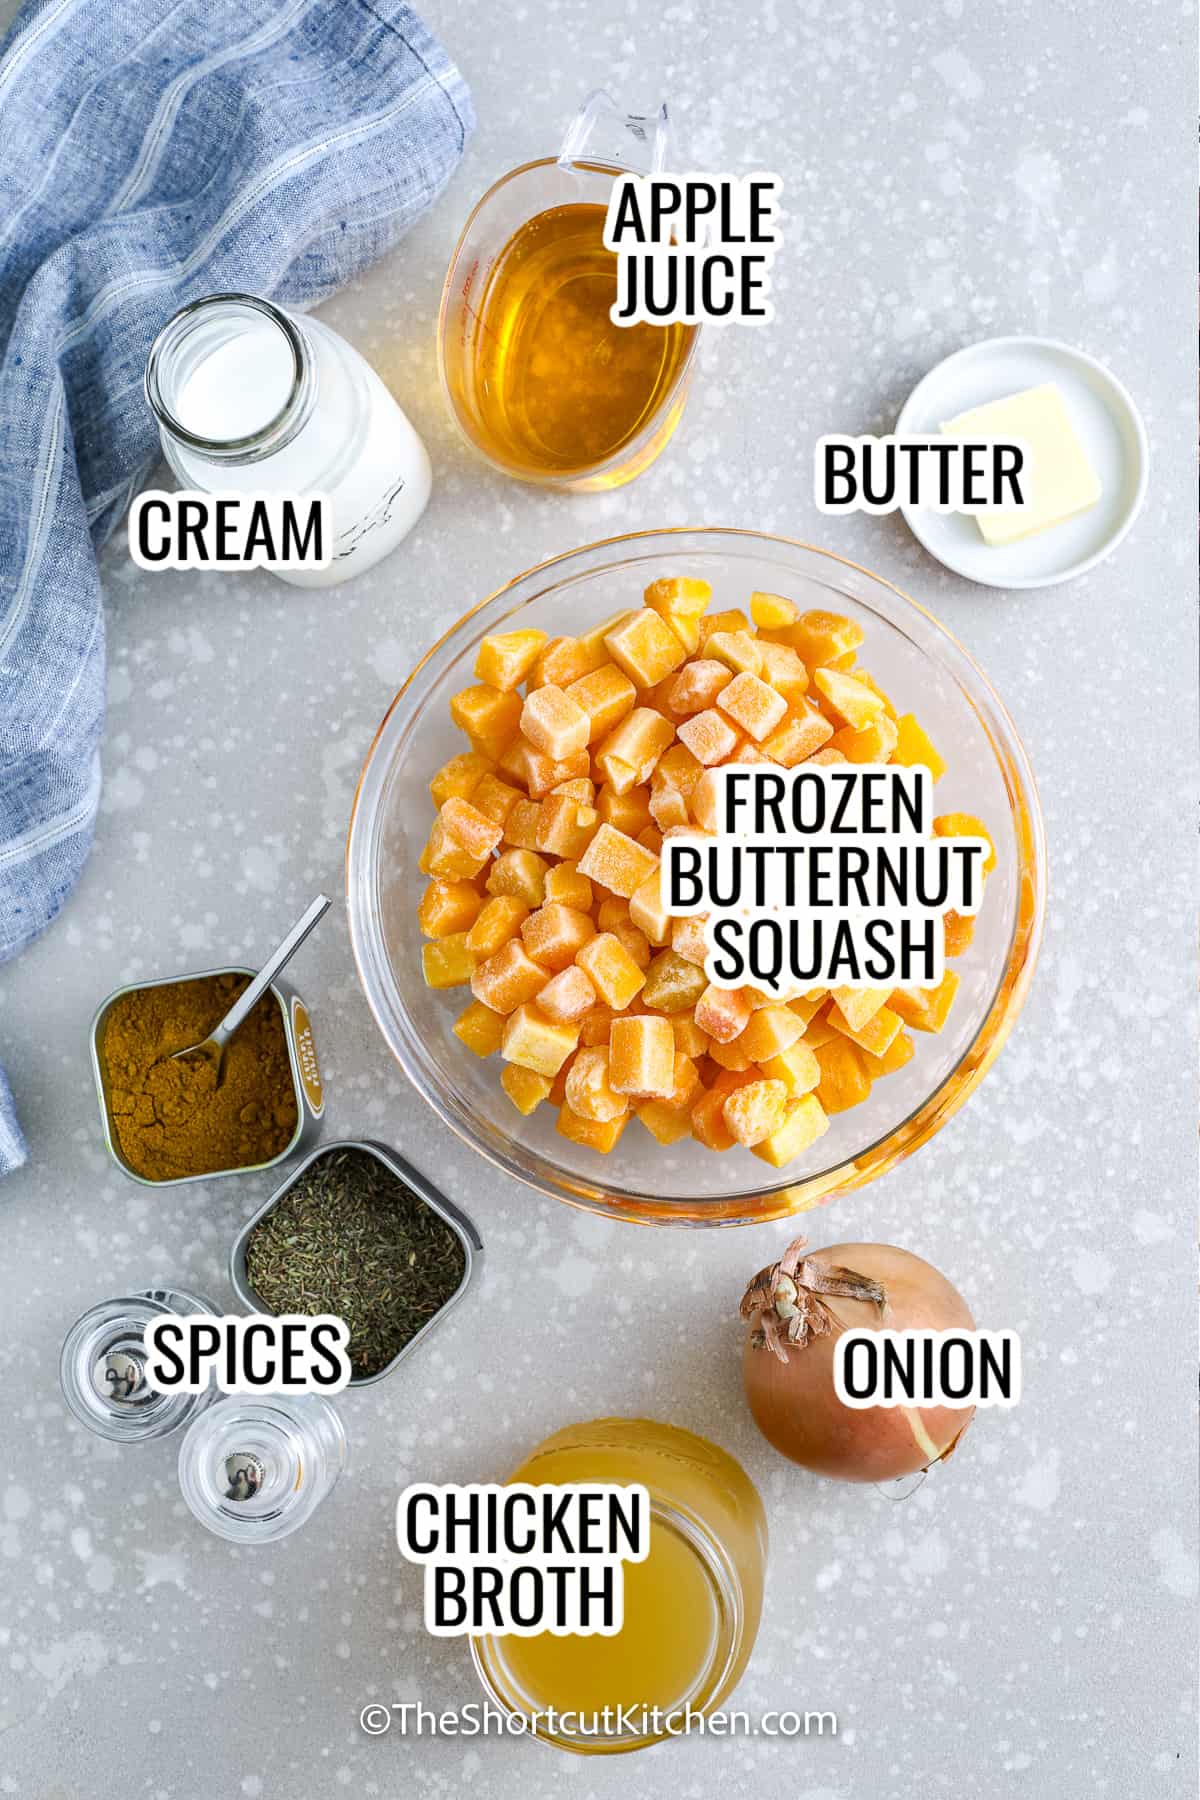 ingredients assembled to make easy butternut squash soup, including butternut squash, chicken broth, onion, cream, butter, and apple juice